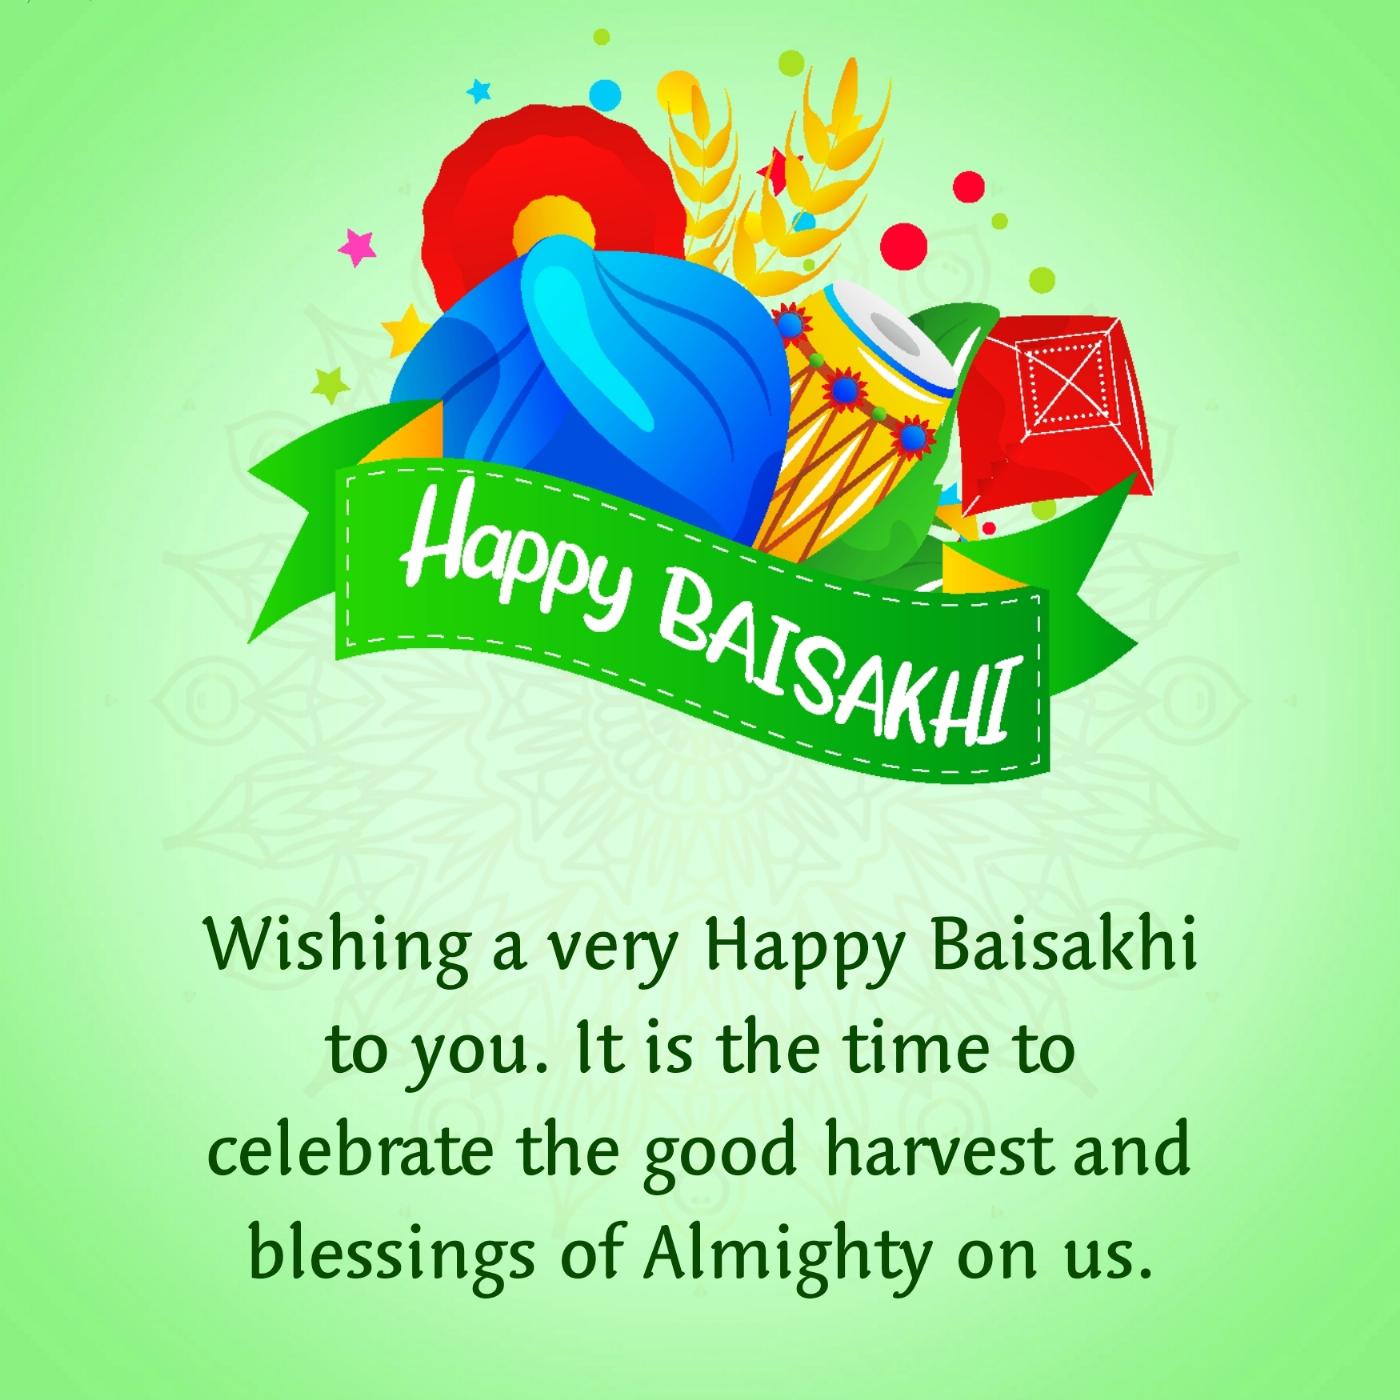 Wishing a very Happy Baisakhi to you It is the time to celebrate